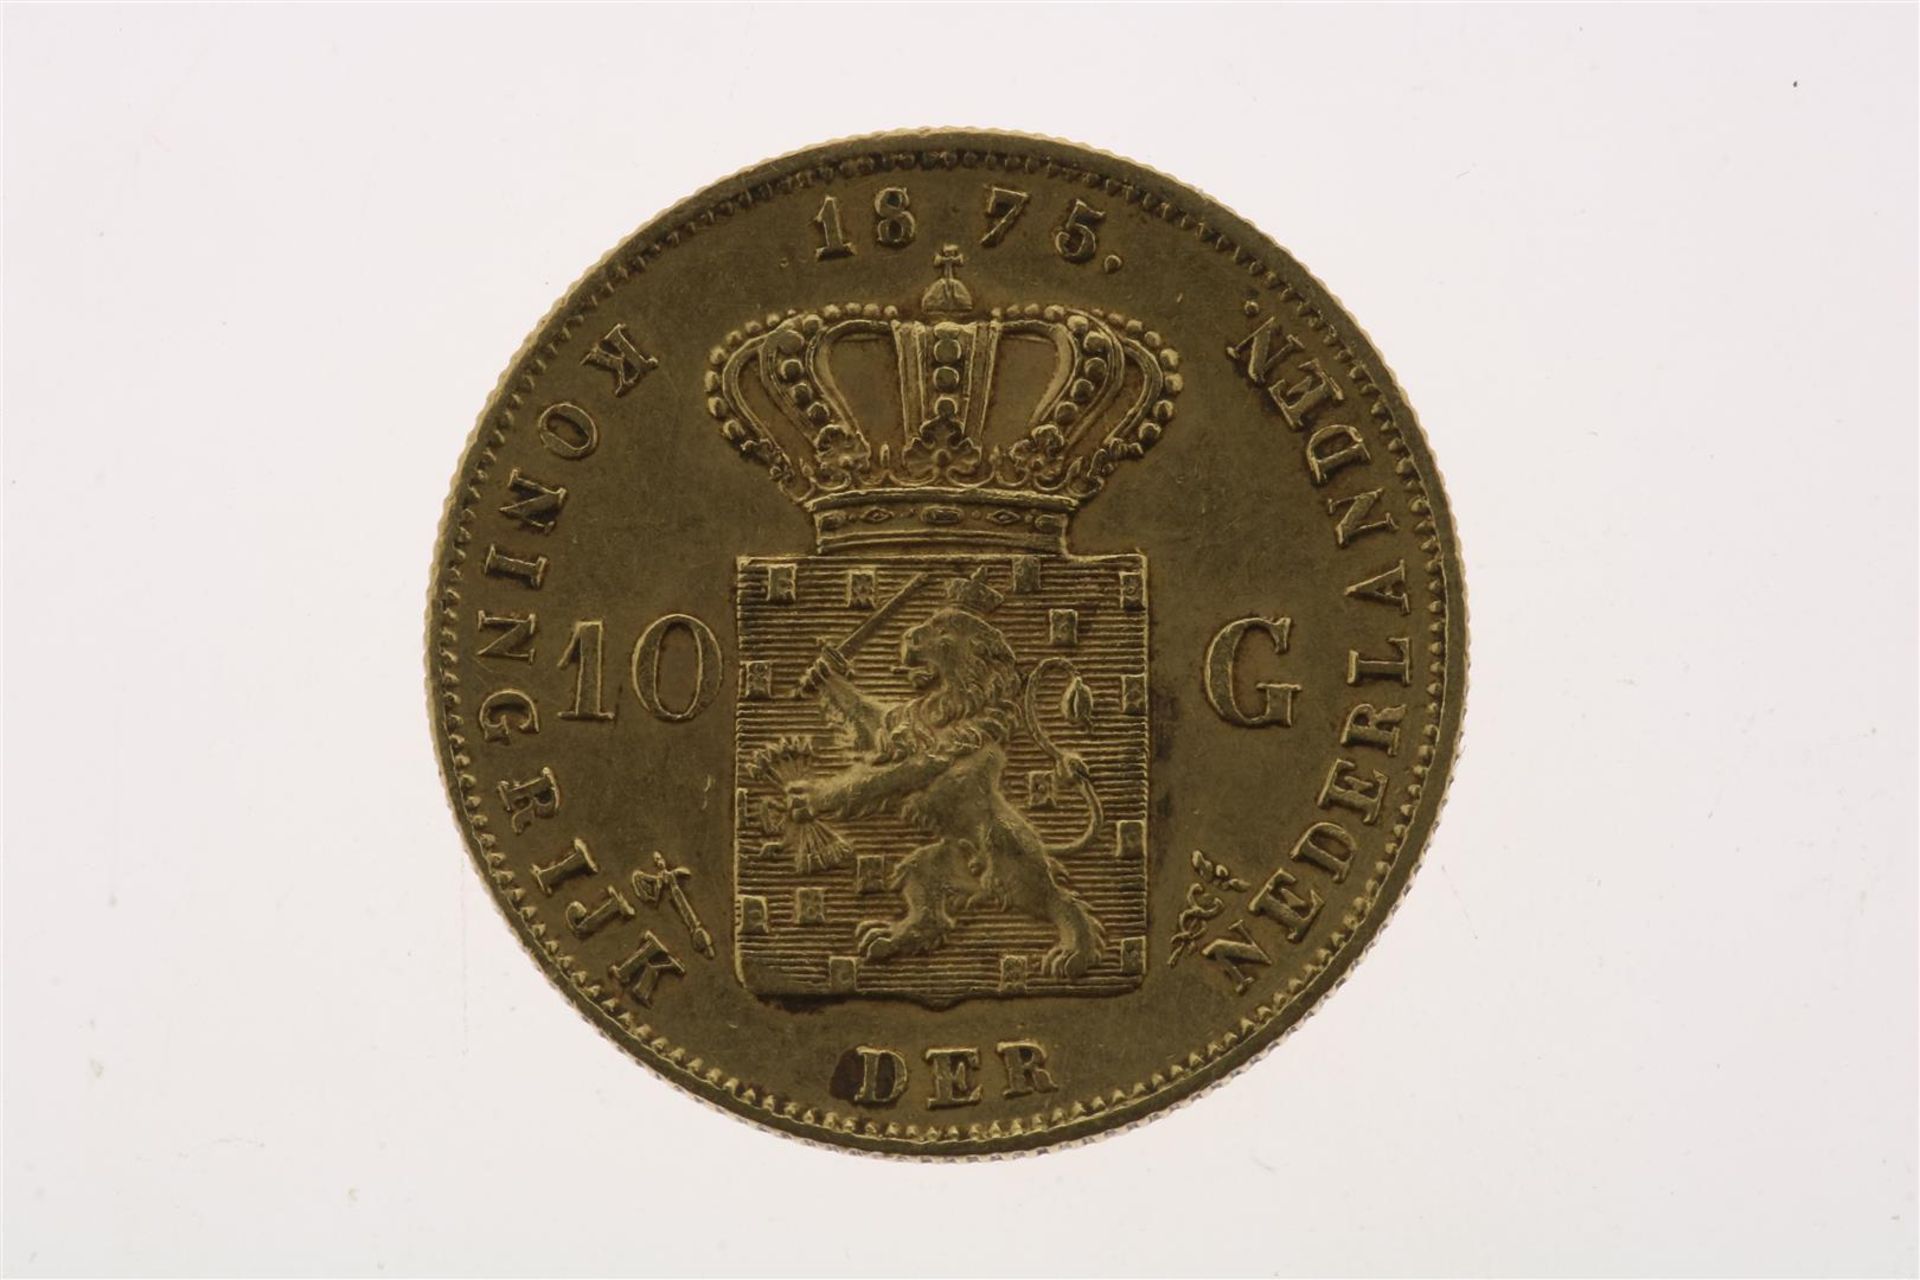 Gold tenner with image of Willem III, looking to the right, 1875, weight 6.72 grams. - Image 2 of 2